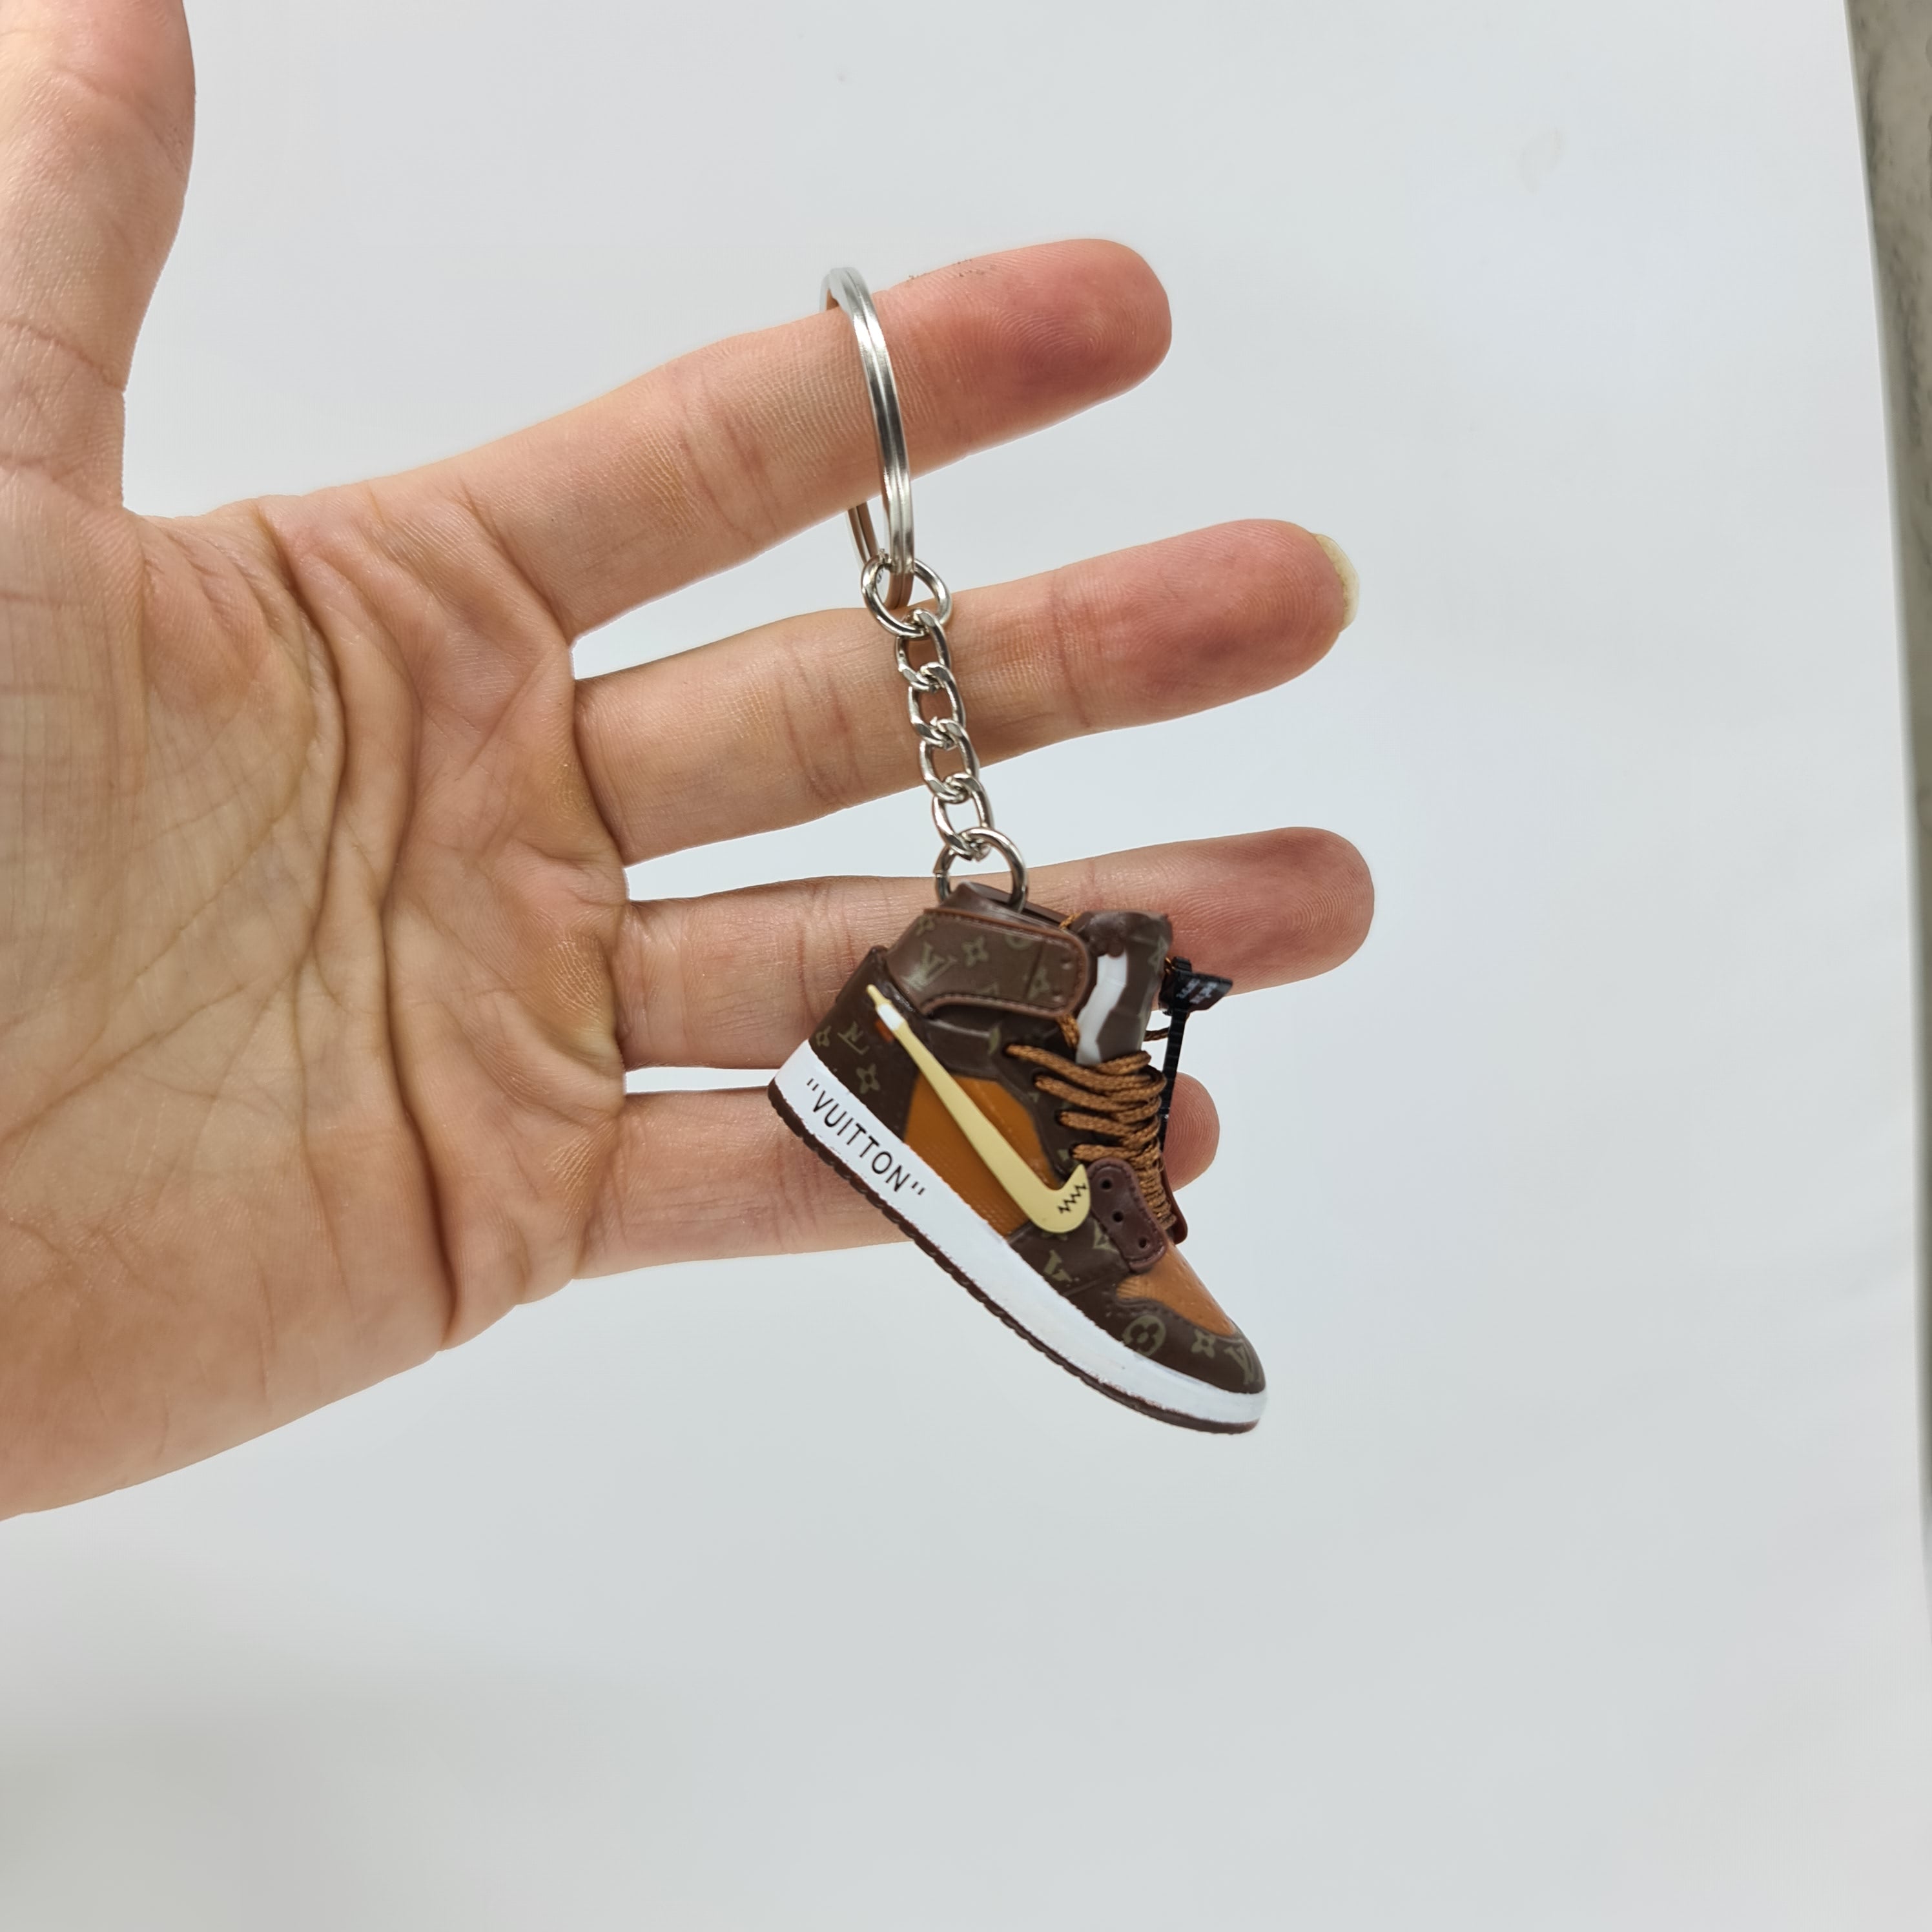 Nike/Louis Mini Shoe Keychain Single or Pair With or Without The Box